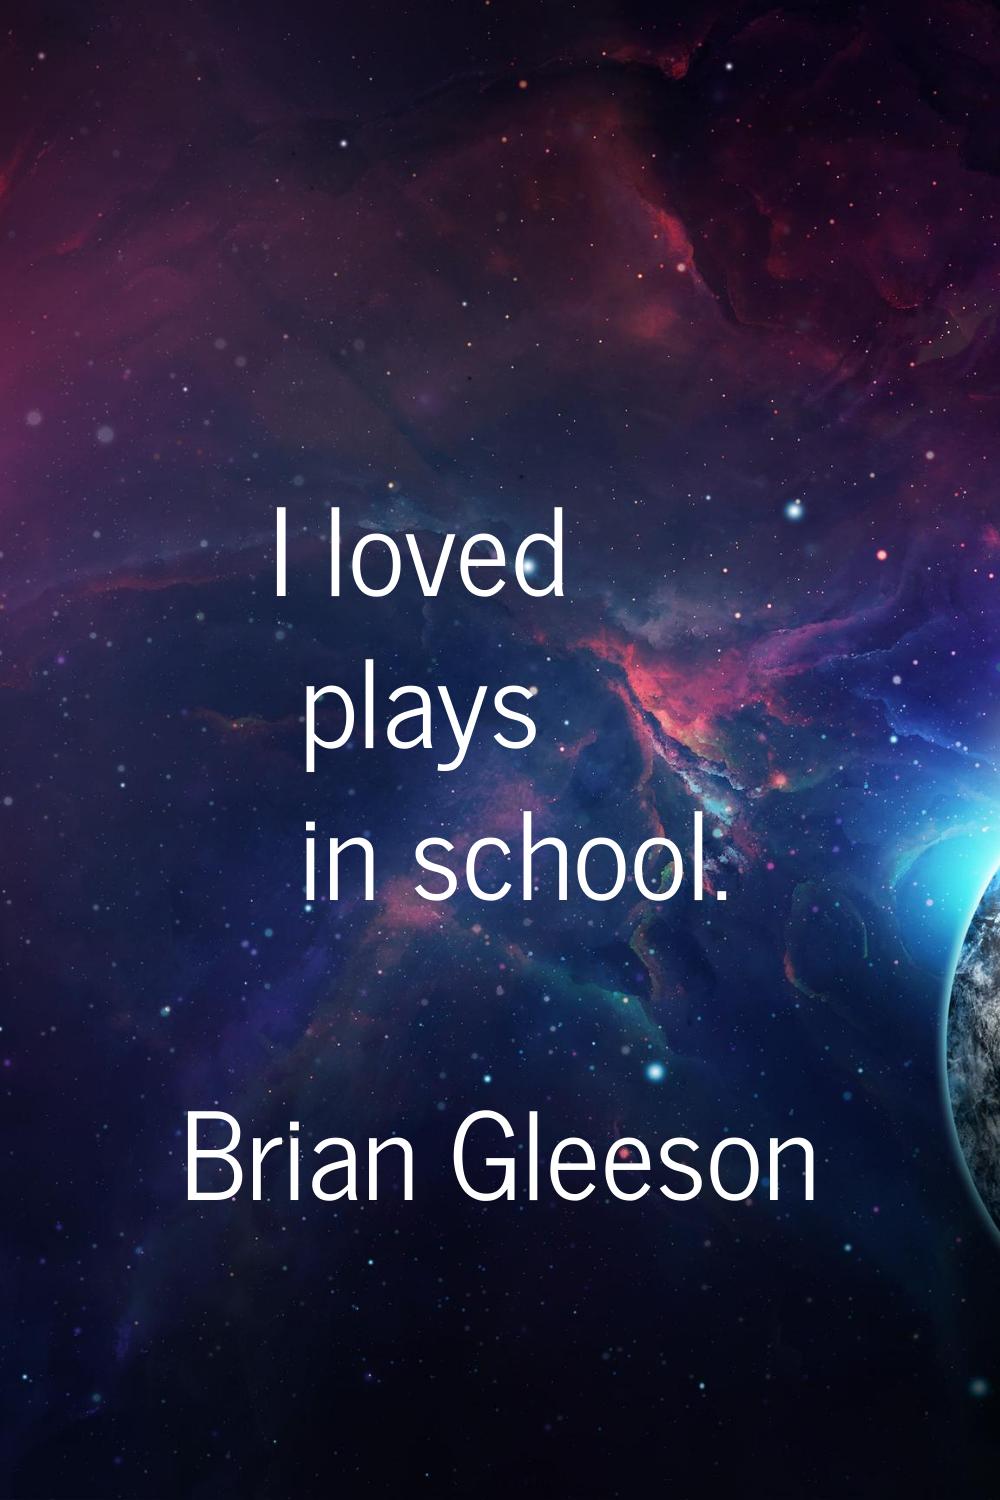 I loved plays in school.